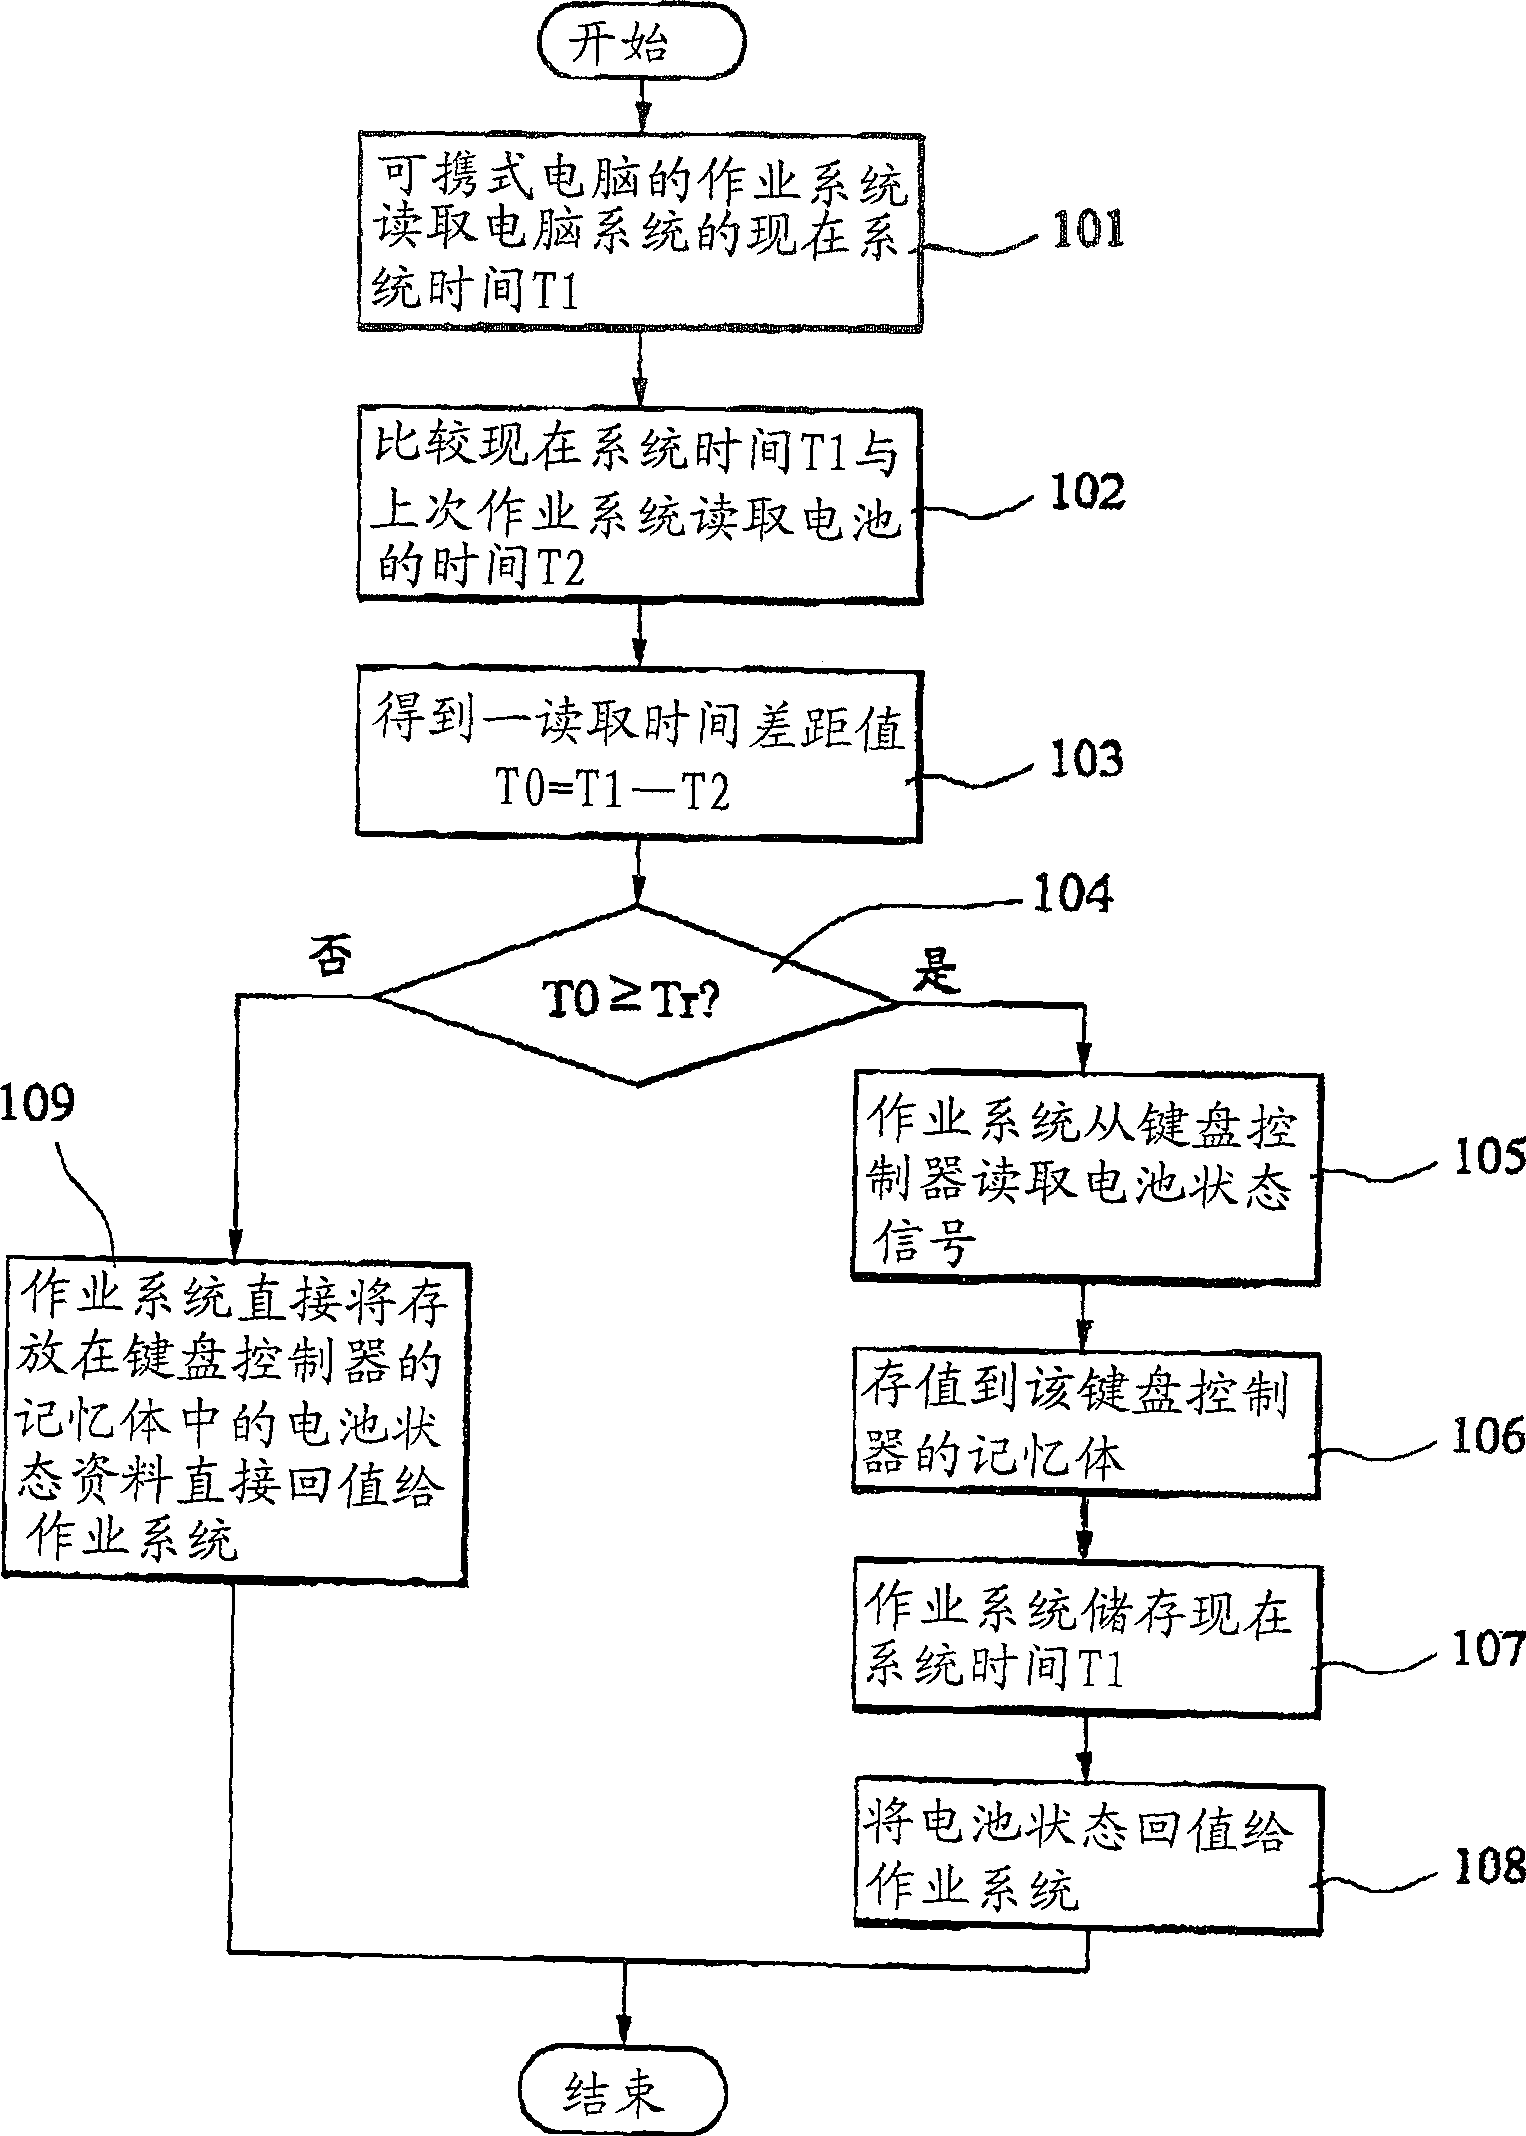 Method for accessing battery state by operation system of portable computer